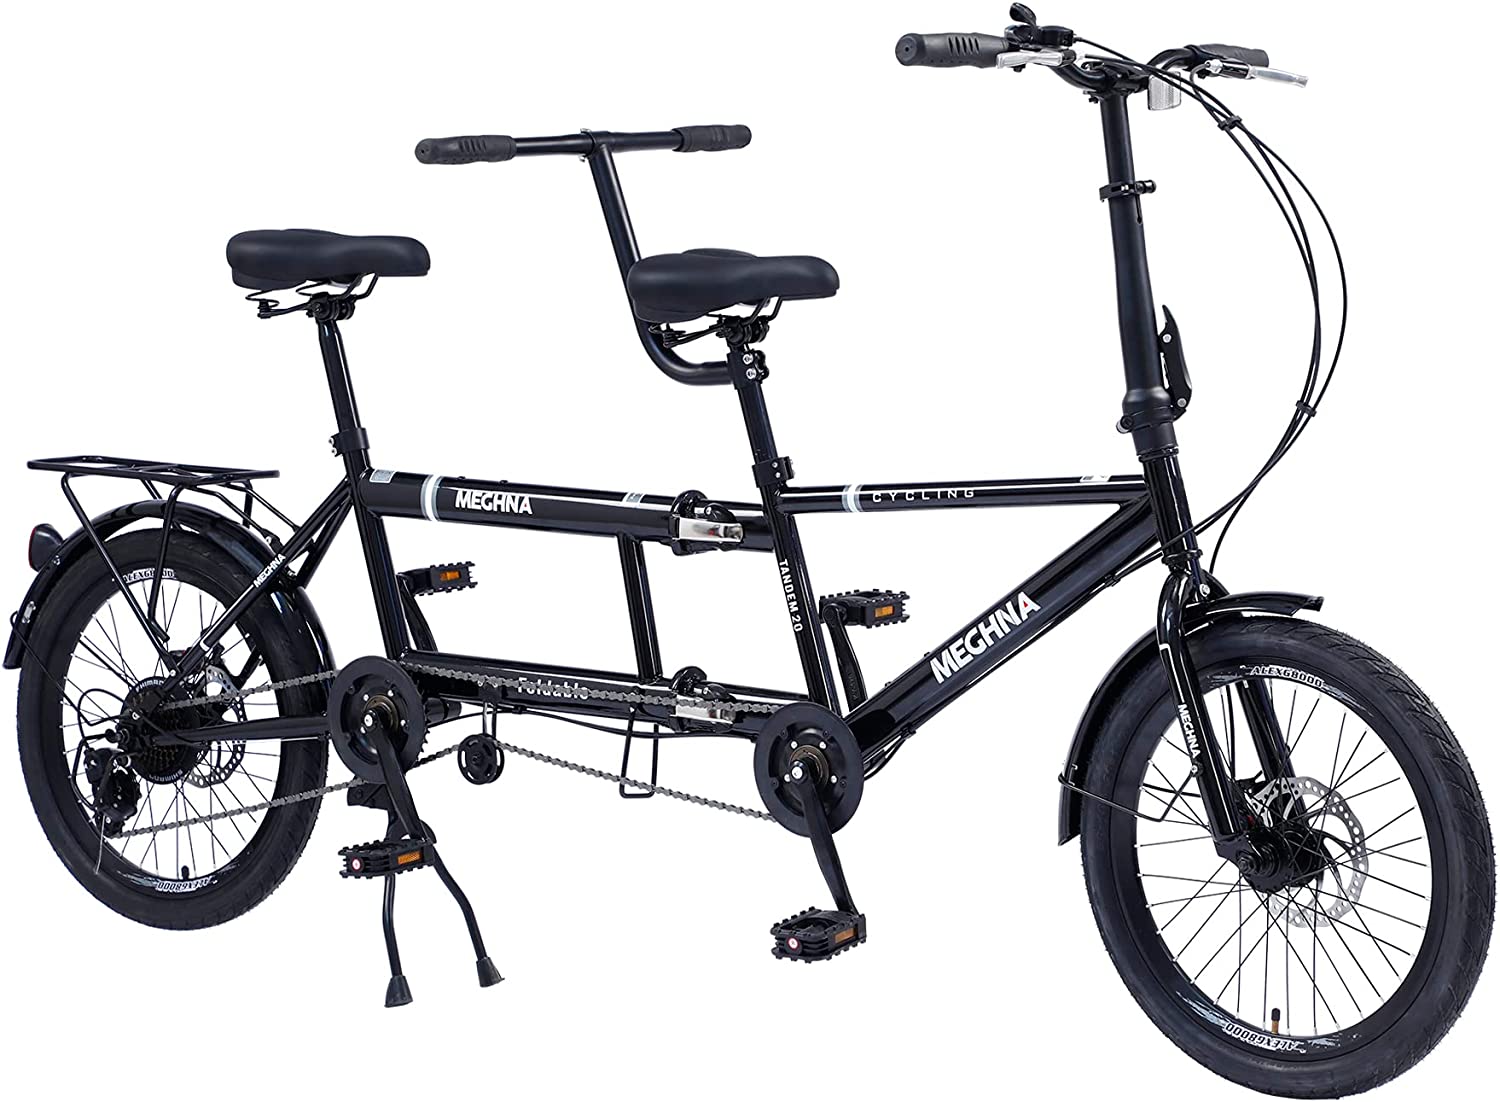 MECHNA Foldable 20 Inch Tandem Bike 3-seater shimao 7speed tandem adult beach cruiser Family travel Parent-child Bicycle